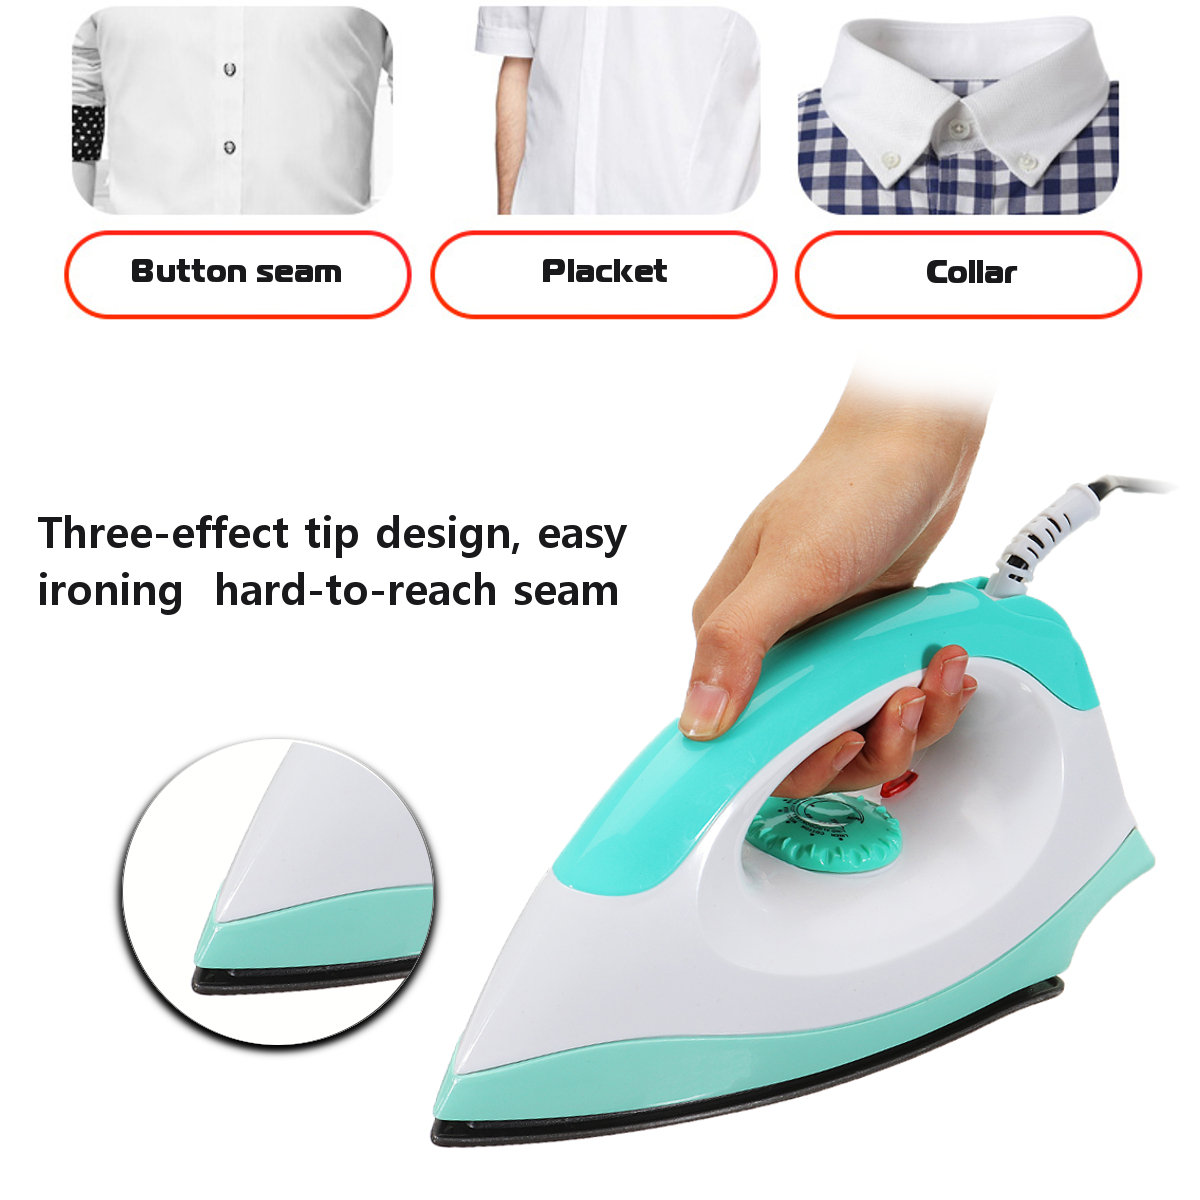 150W-DC12V-Mini-Electric-Iron-Portable-Clothes-Dry-Handheld-Steamer-Steam-Irons-Travel-Equipment-1347808-5